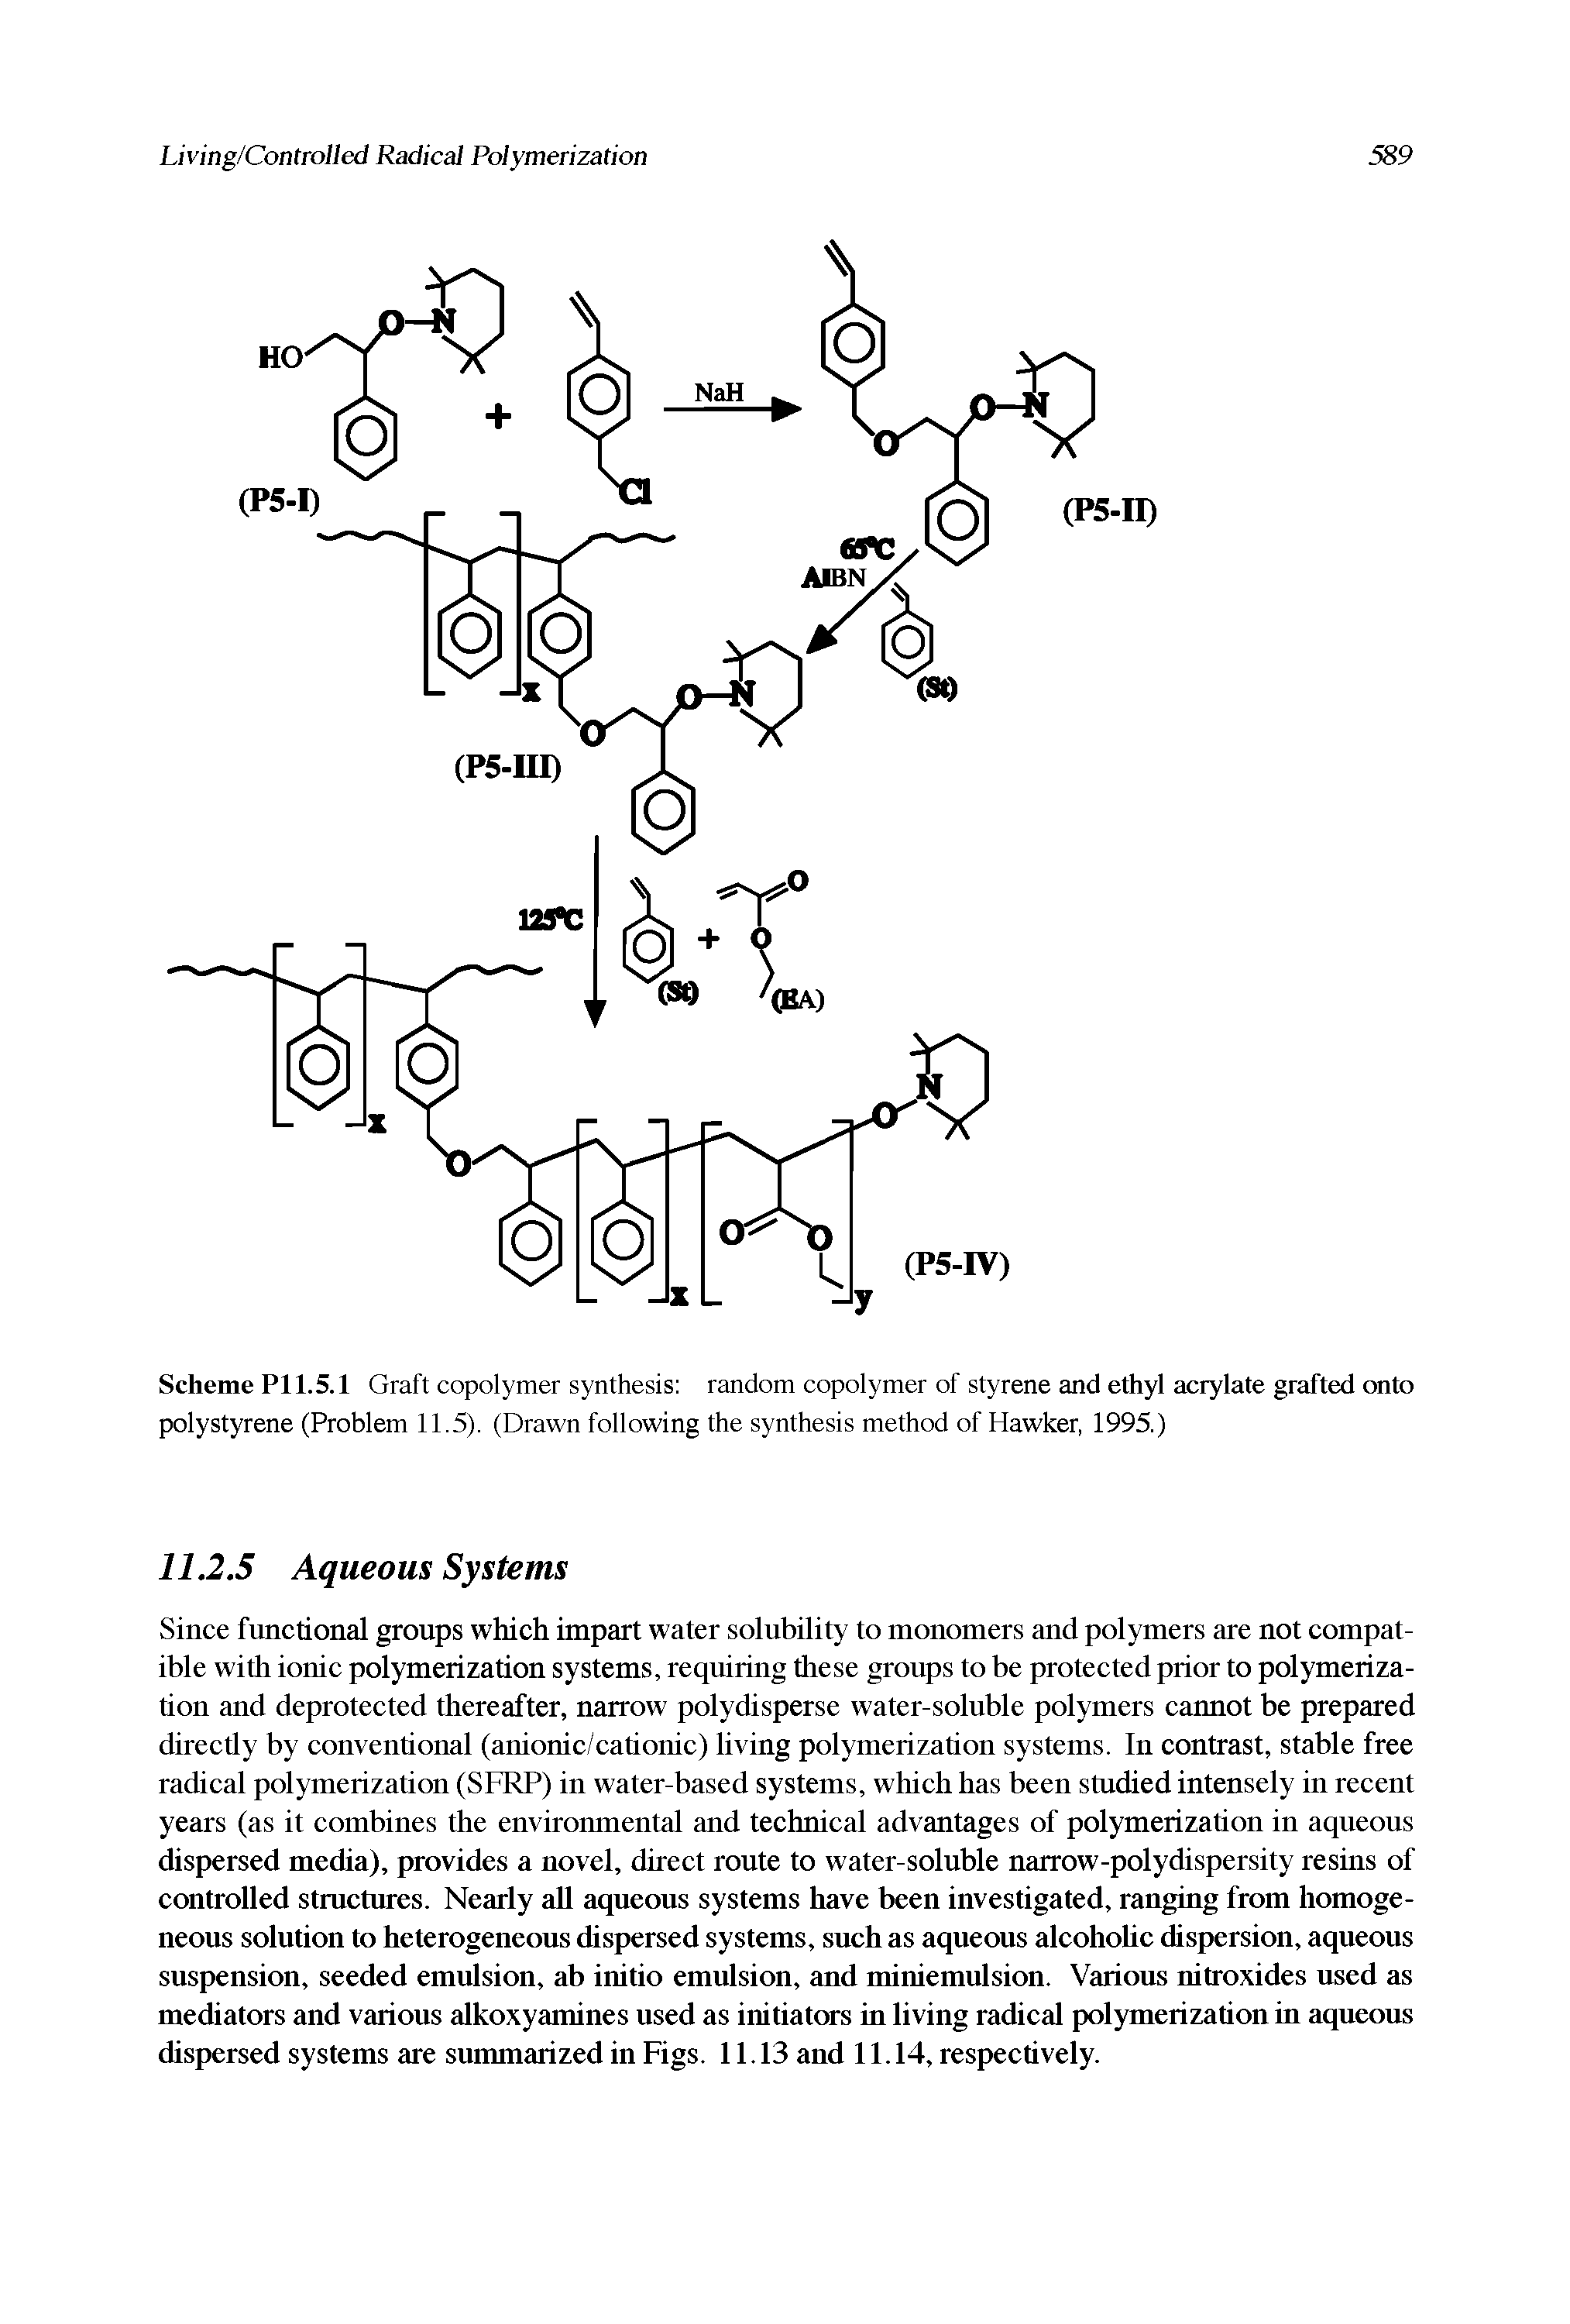 Scheme Pll.5.1 Graft copolymer synthesis random copolymer of styrene and ethyl acrylate grafted onto polystyrene (Problem 11.5). (Drawn following the synthesis method of Hawker, 1995.)...